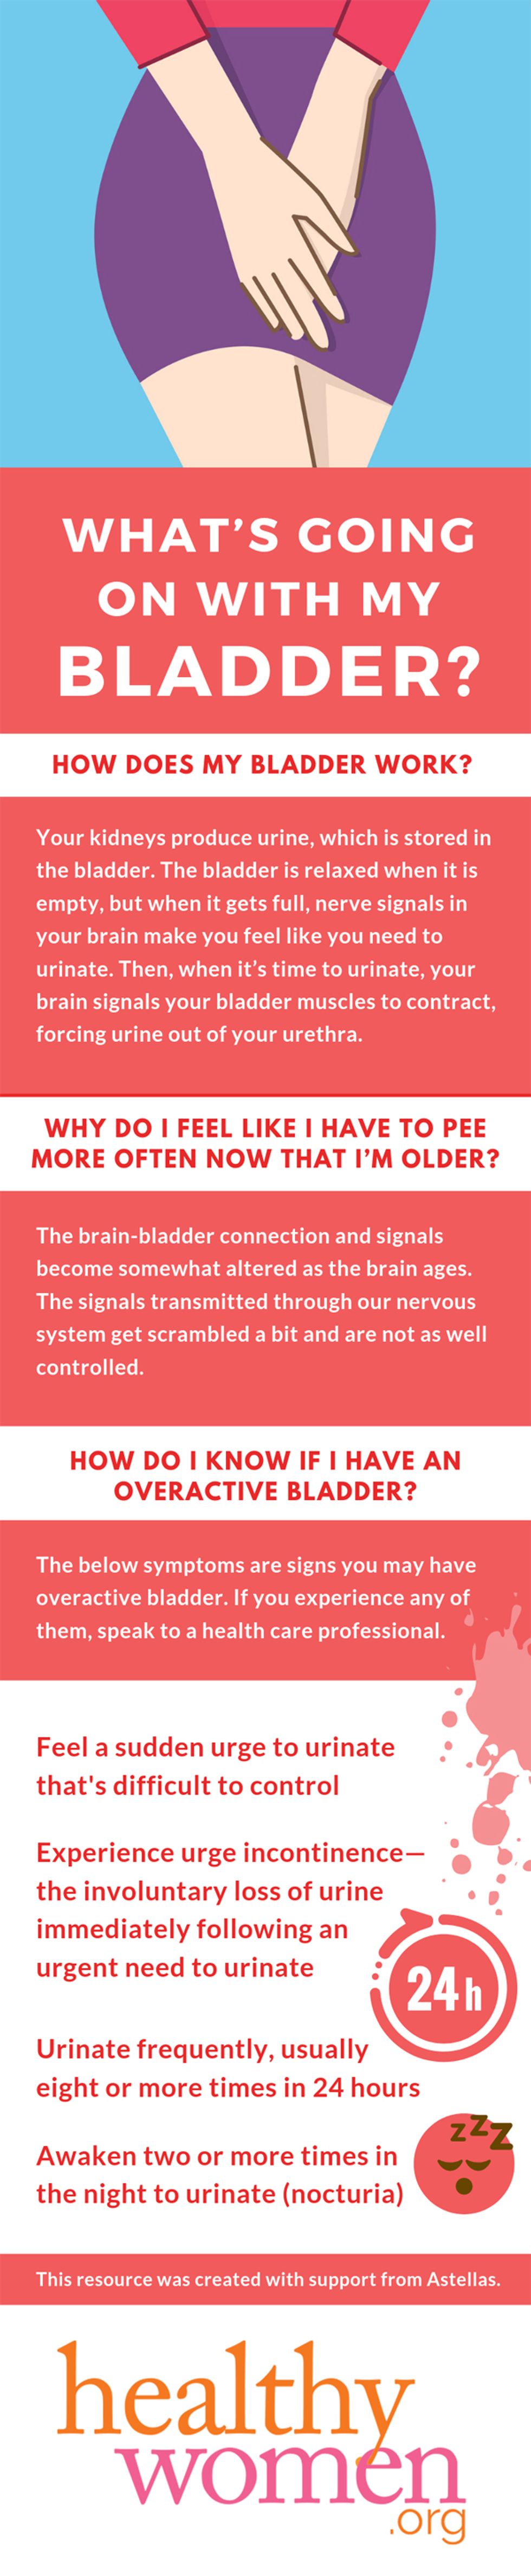 What Causes Overactive Bladder?